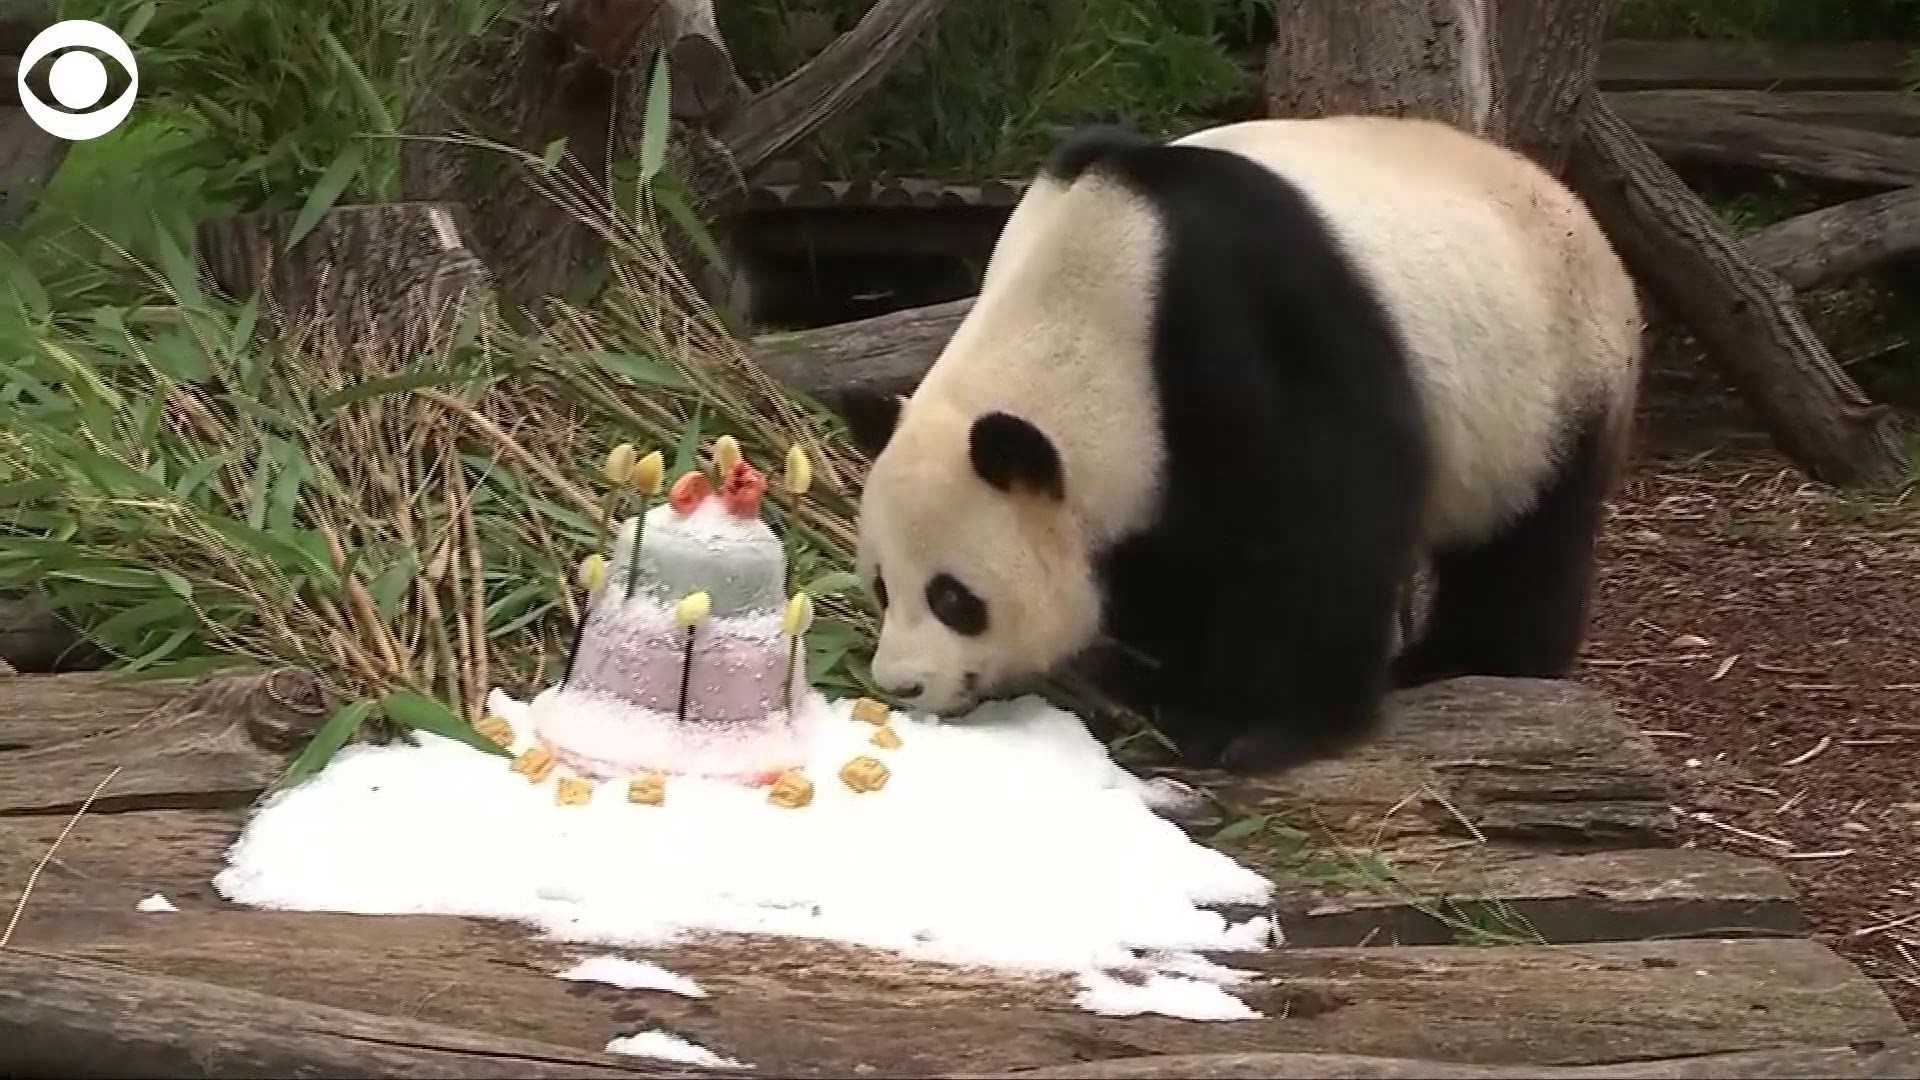 Happy birthday Jiao Qing! The Berlin Zoo's male panda celebrated his 9th birthday on Monday with his very own sweet potato and beetroot cake.